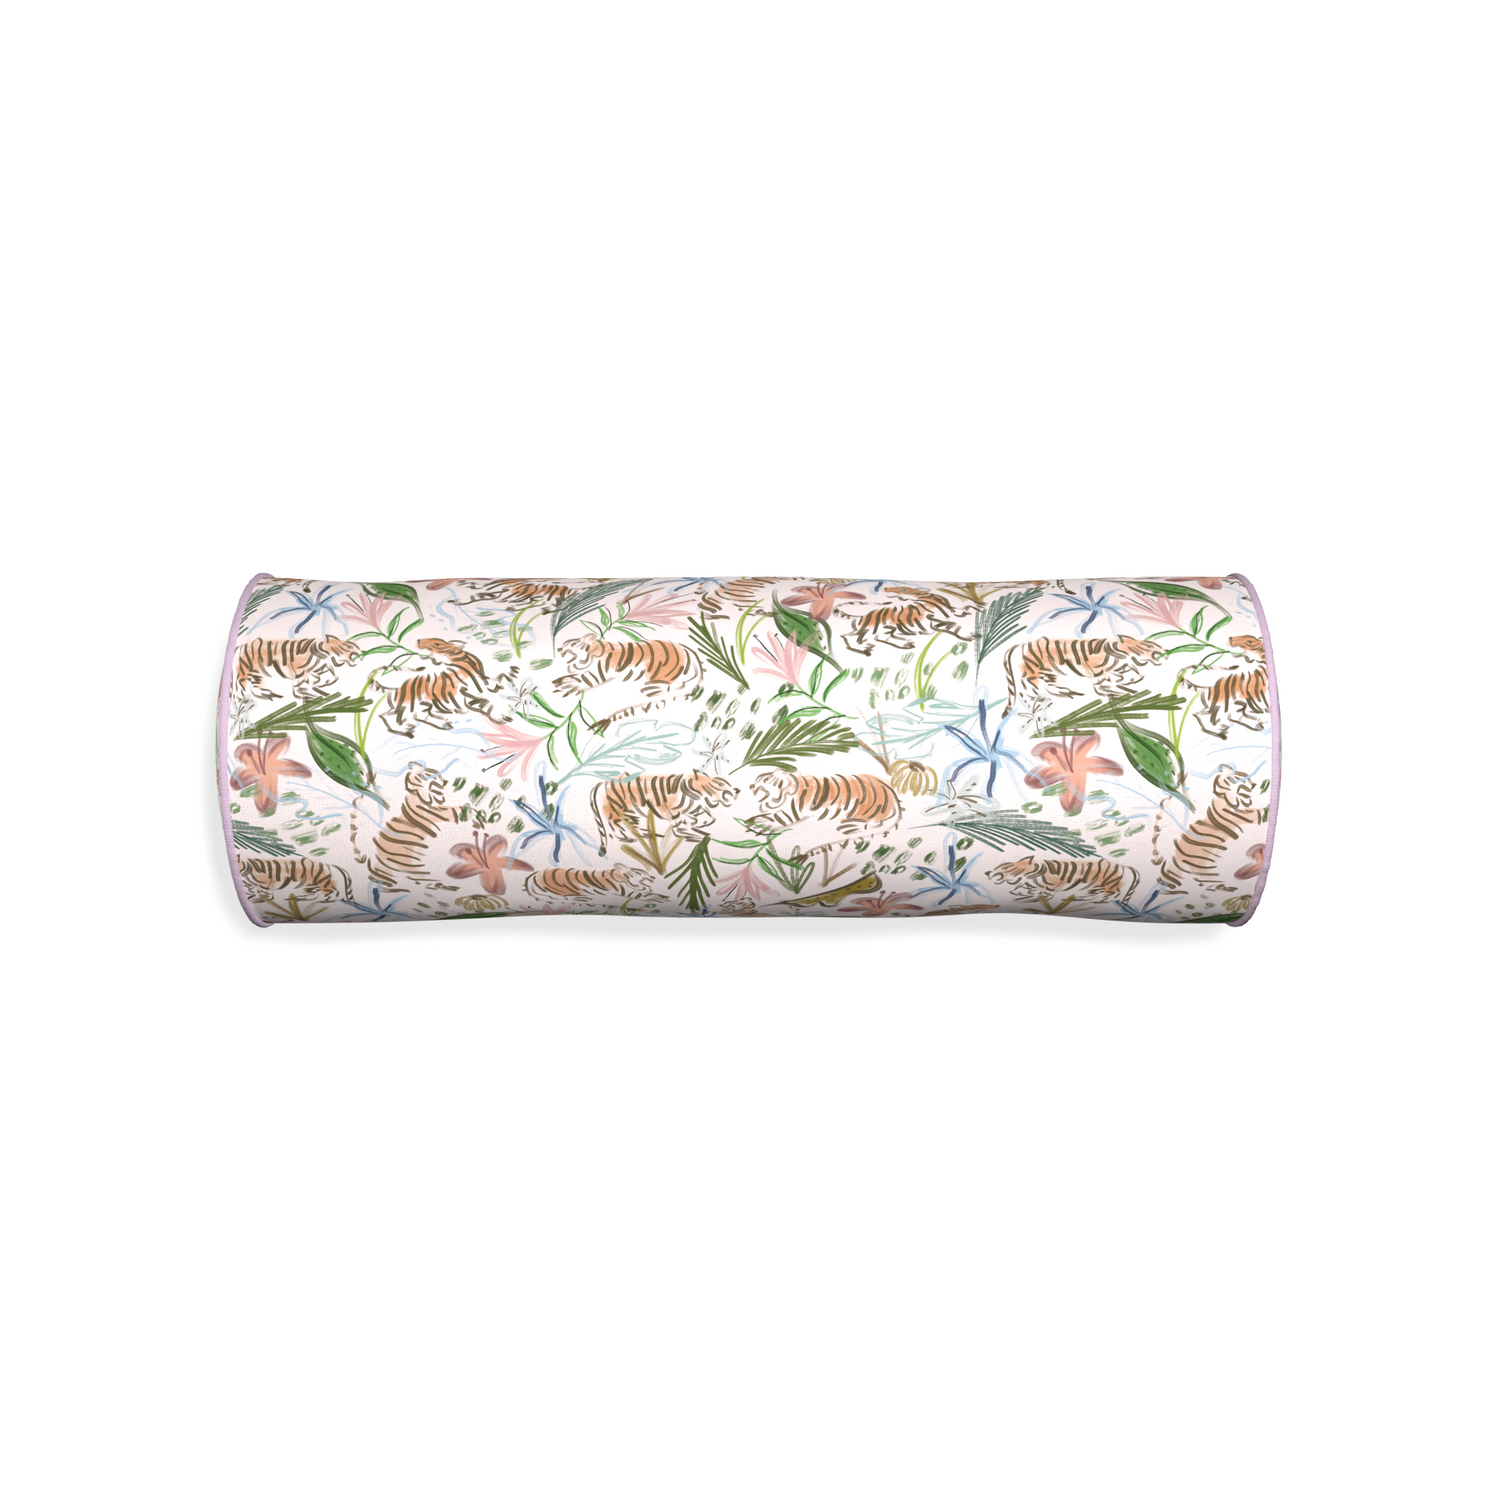 Bolster frida pink custom pink chinoiserie tigerpillow with l piping on white background